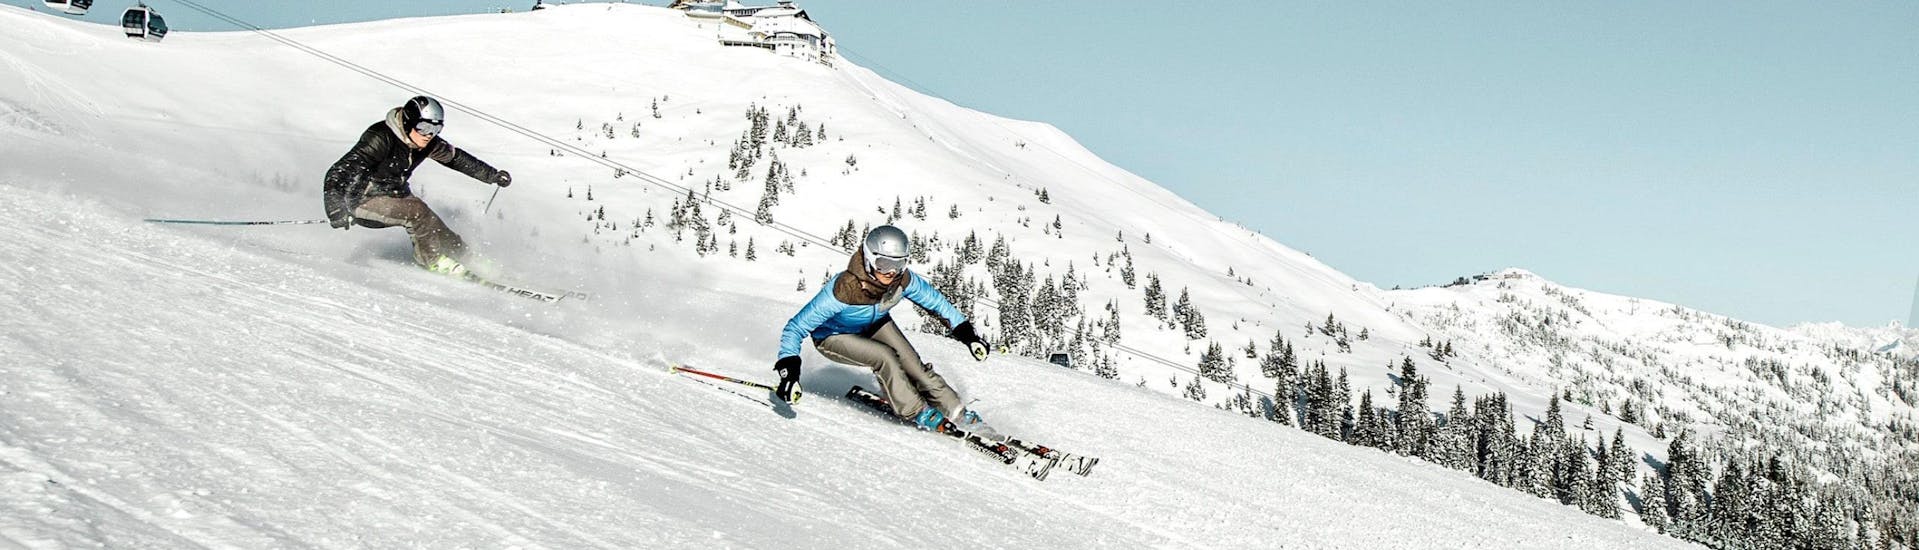 Two skiers are skiing down the ski slopes of the Schmittenhöhe mountain in Zell am See, a popular Austrian ski resort where local ski schools offer ski lessons to all those who want to learn to ski.